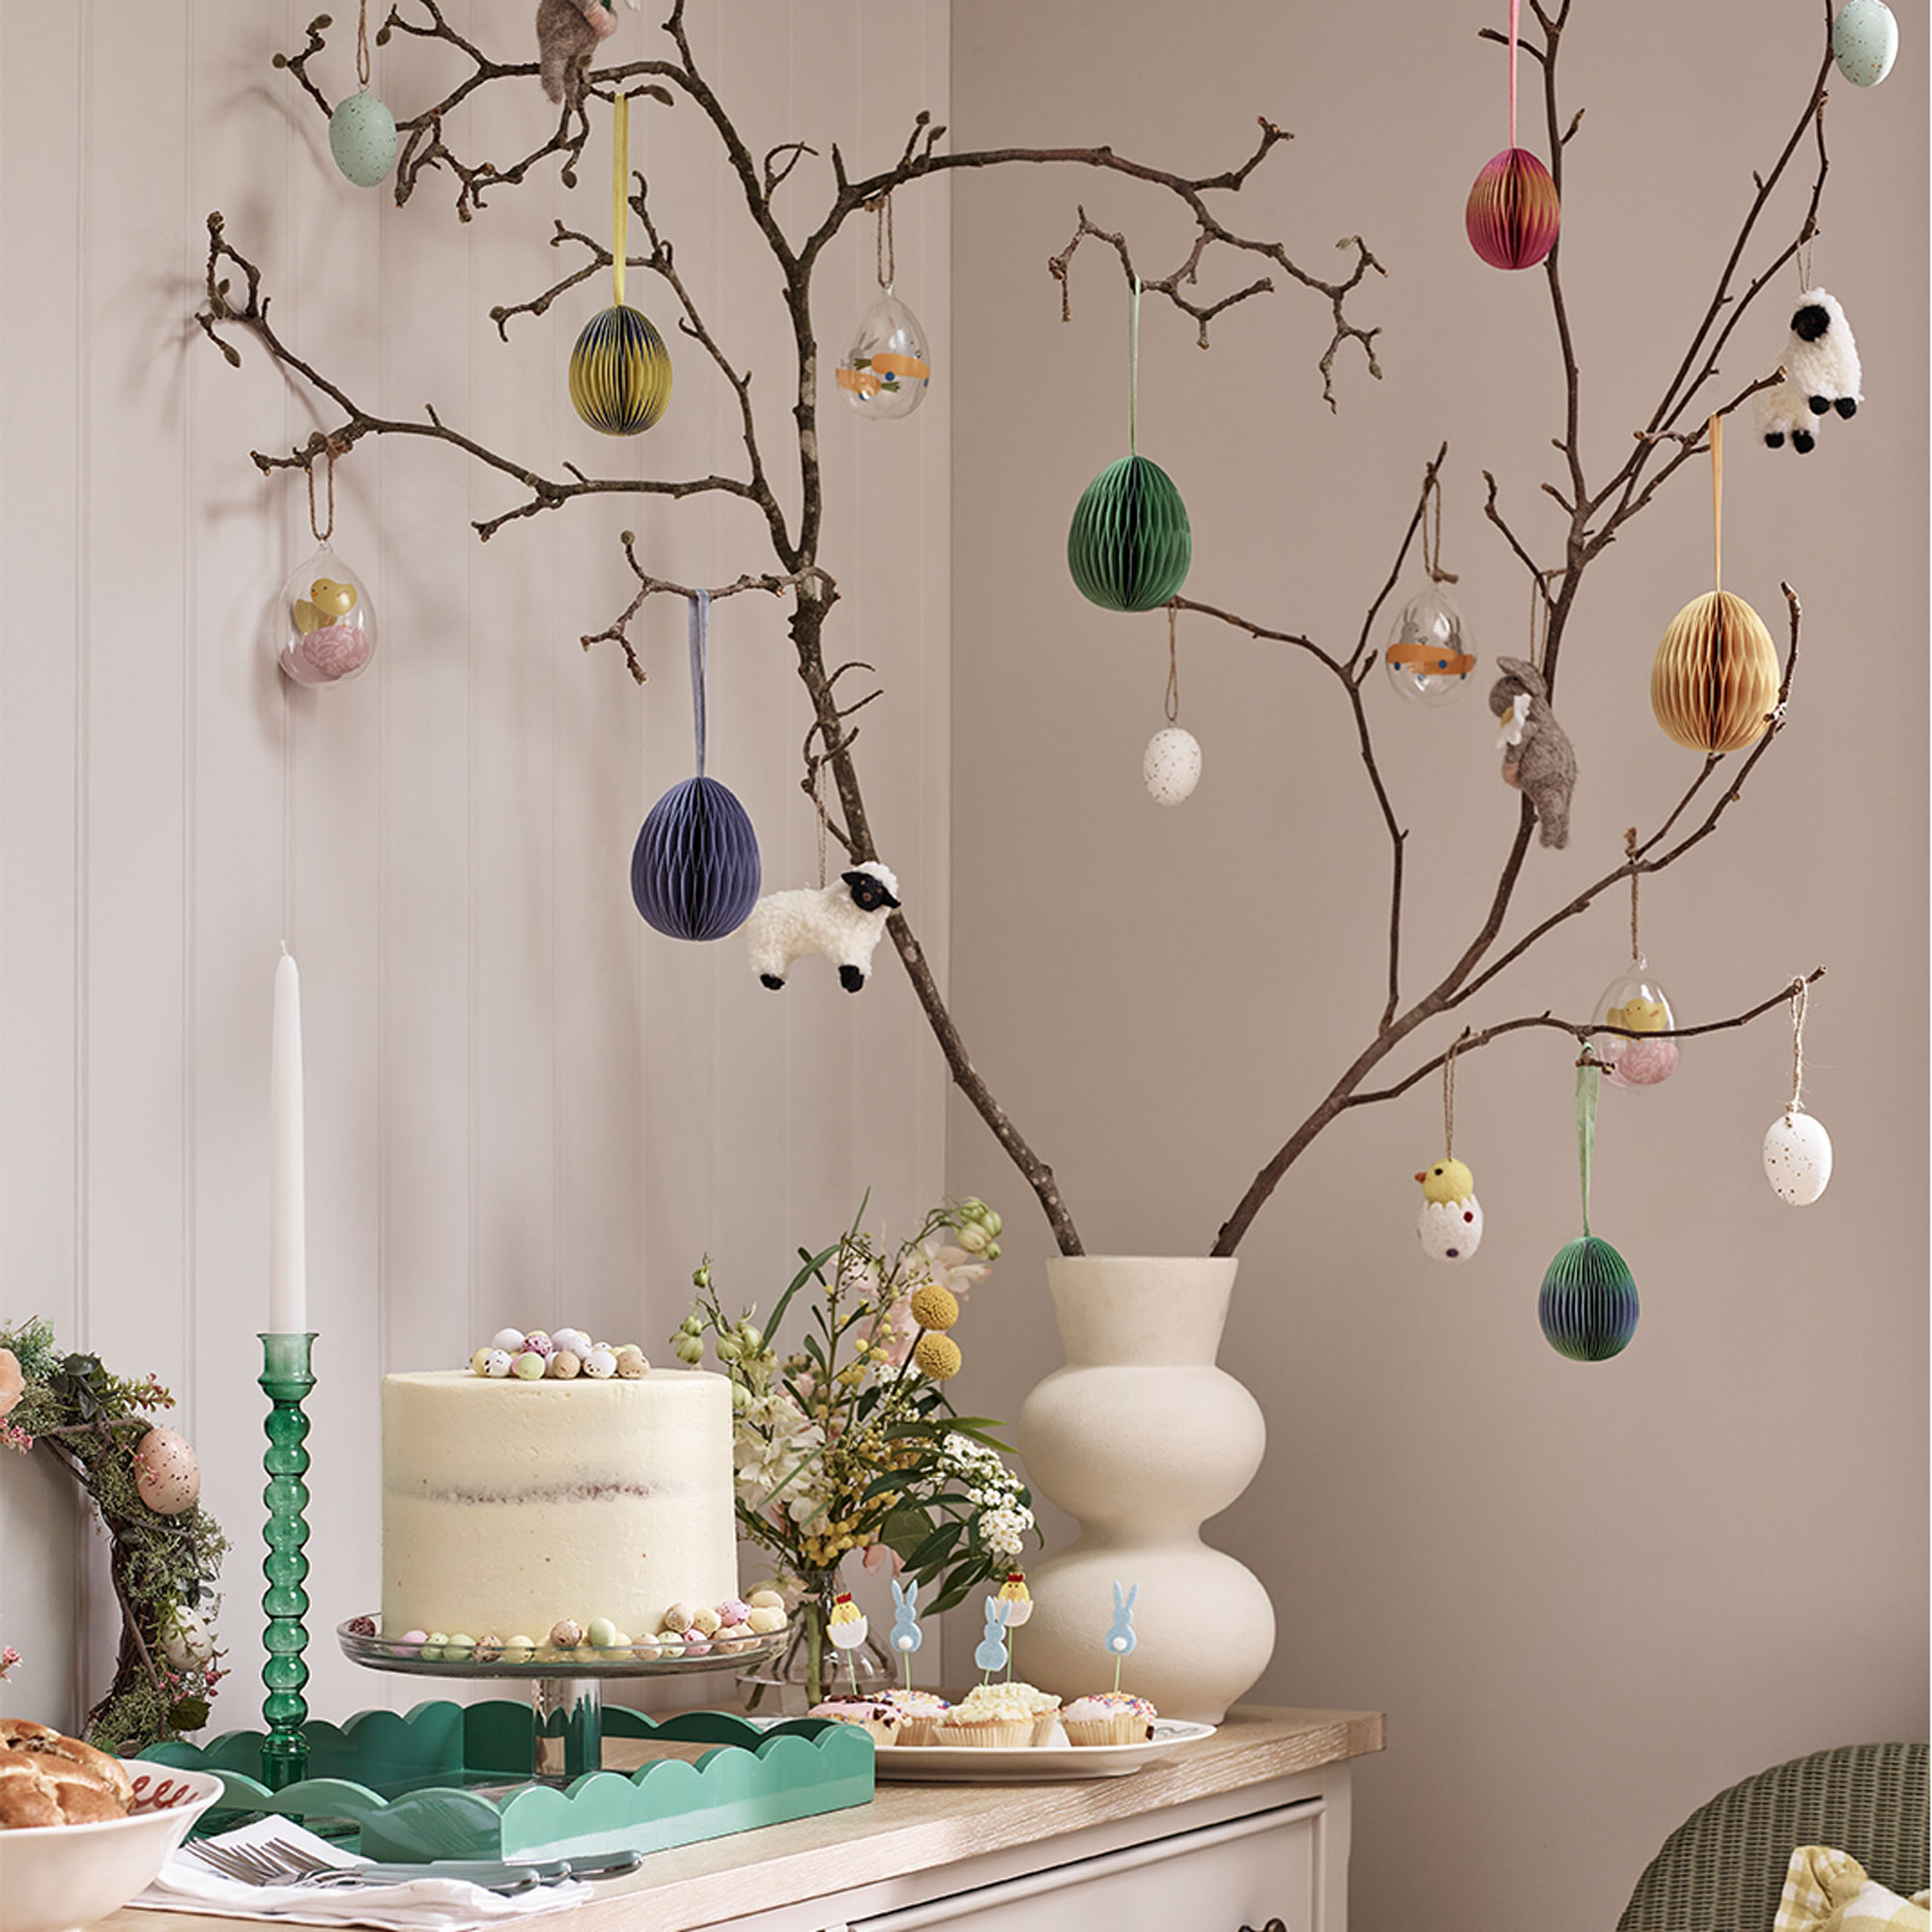 Easter decorating ideas - 27 ways to fill your home with the joys of spring